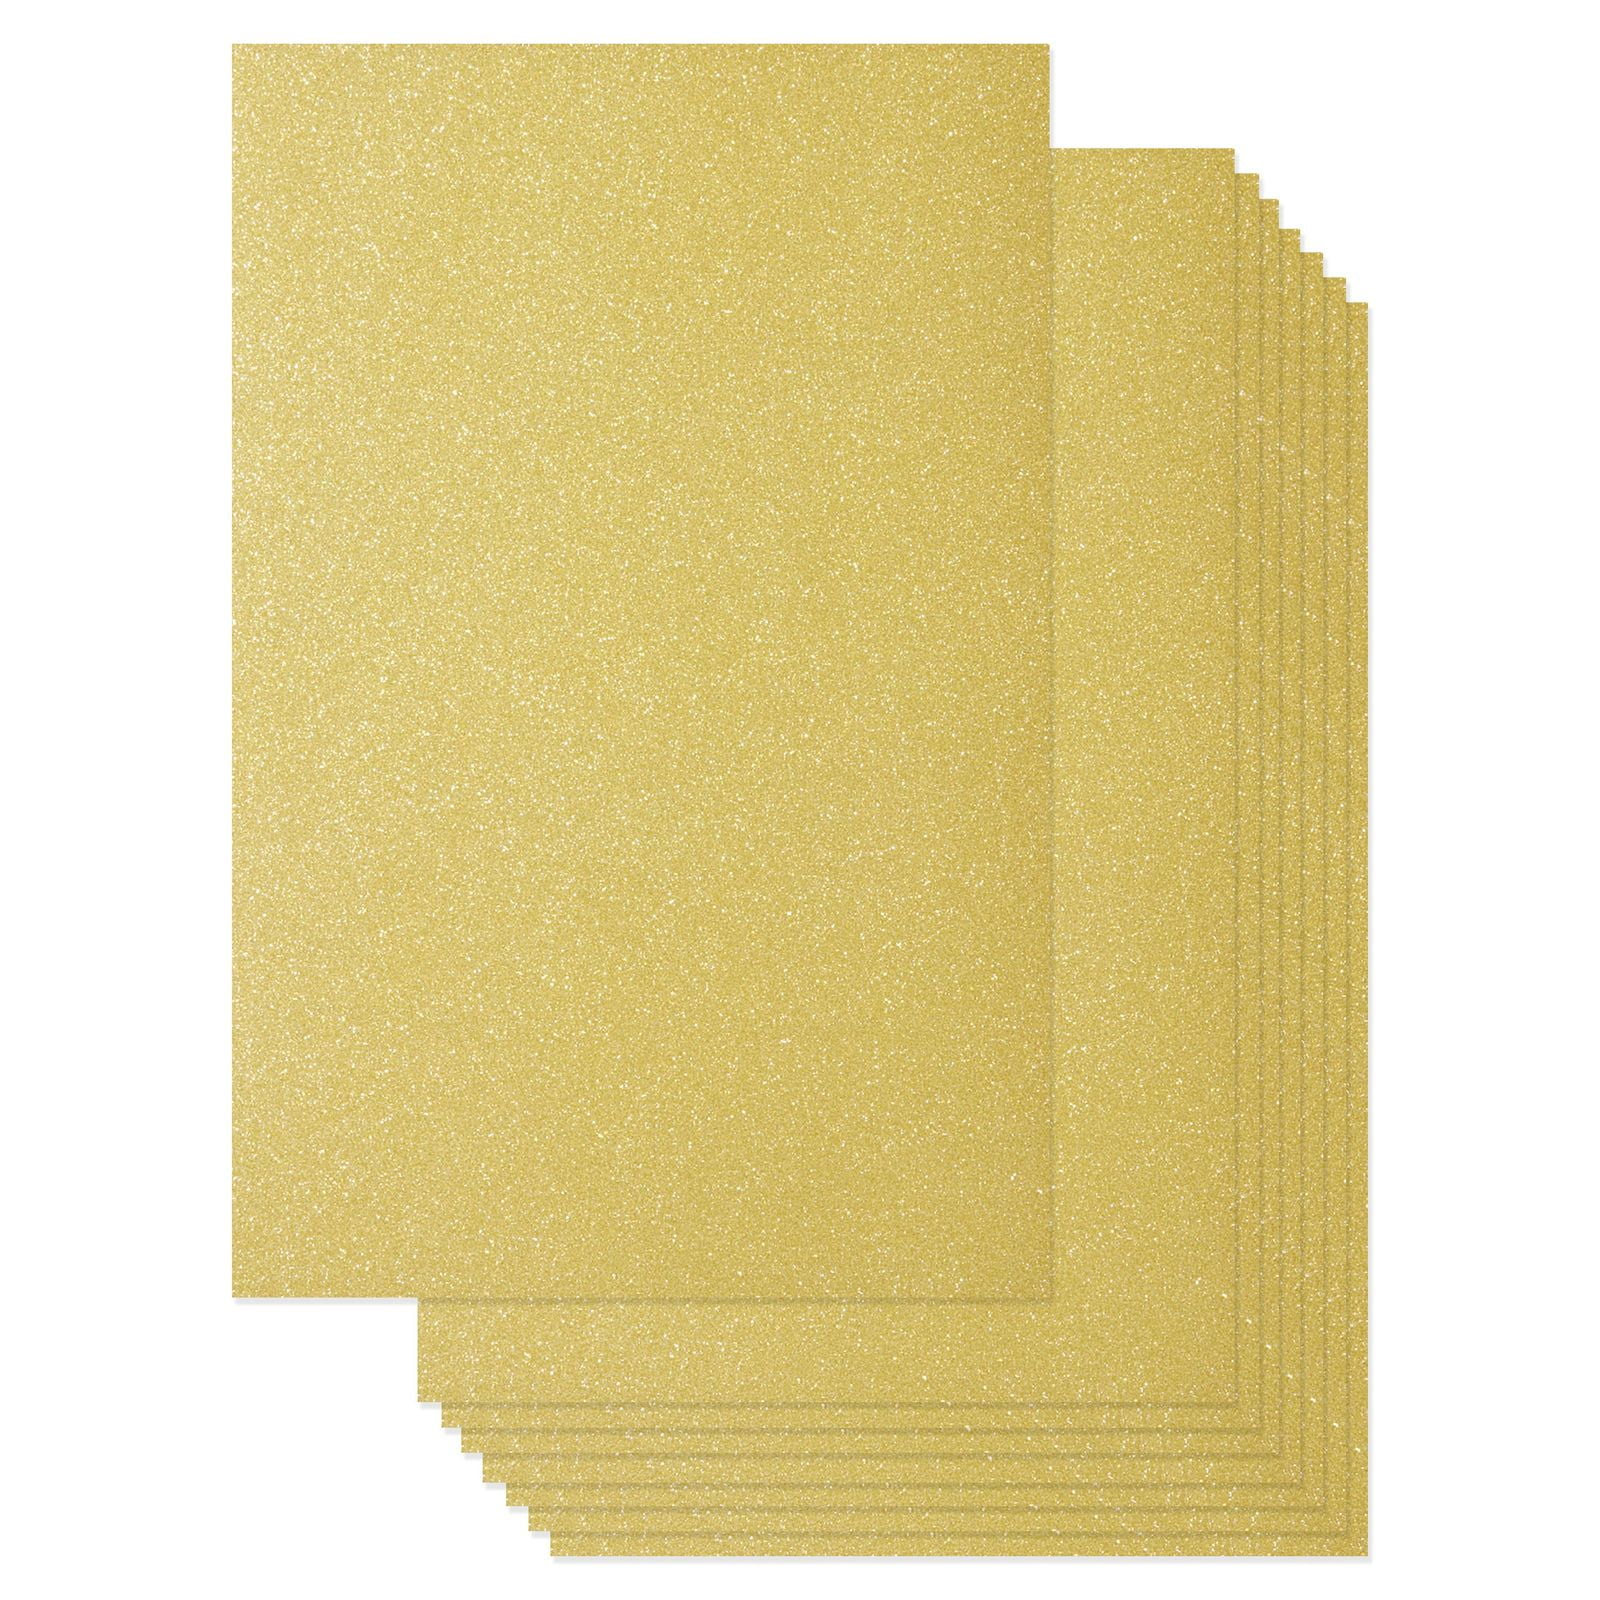 Sliver Paper 20 x A4 metallic/shimmer paper for invitation and Craft 120gsm 